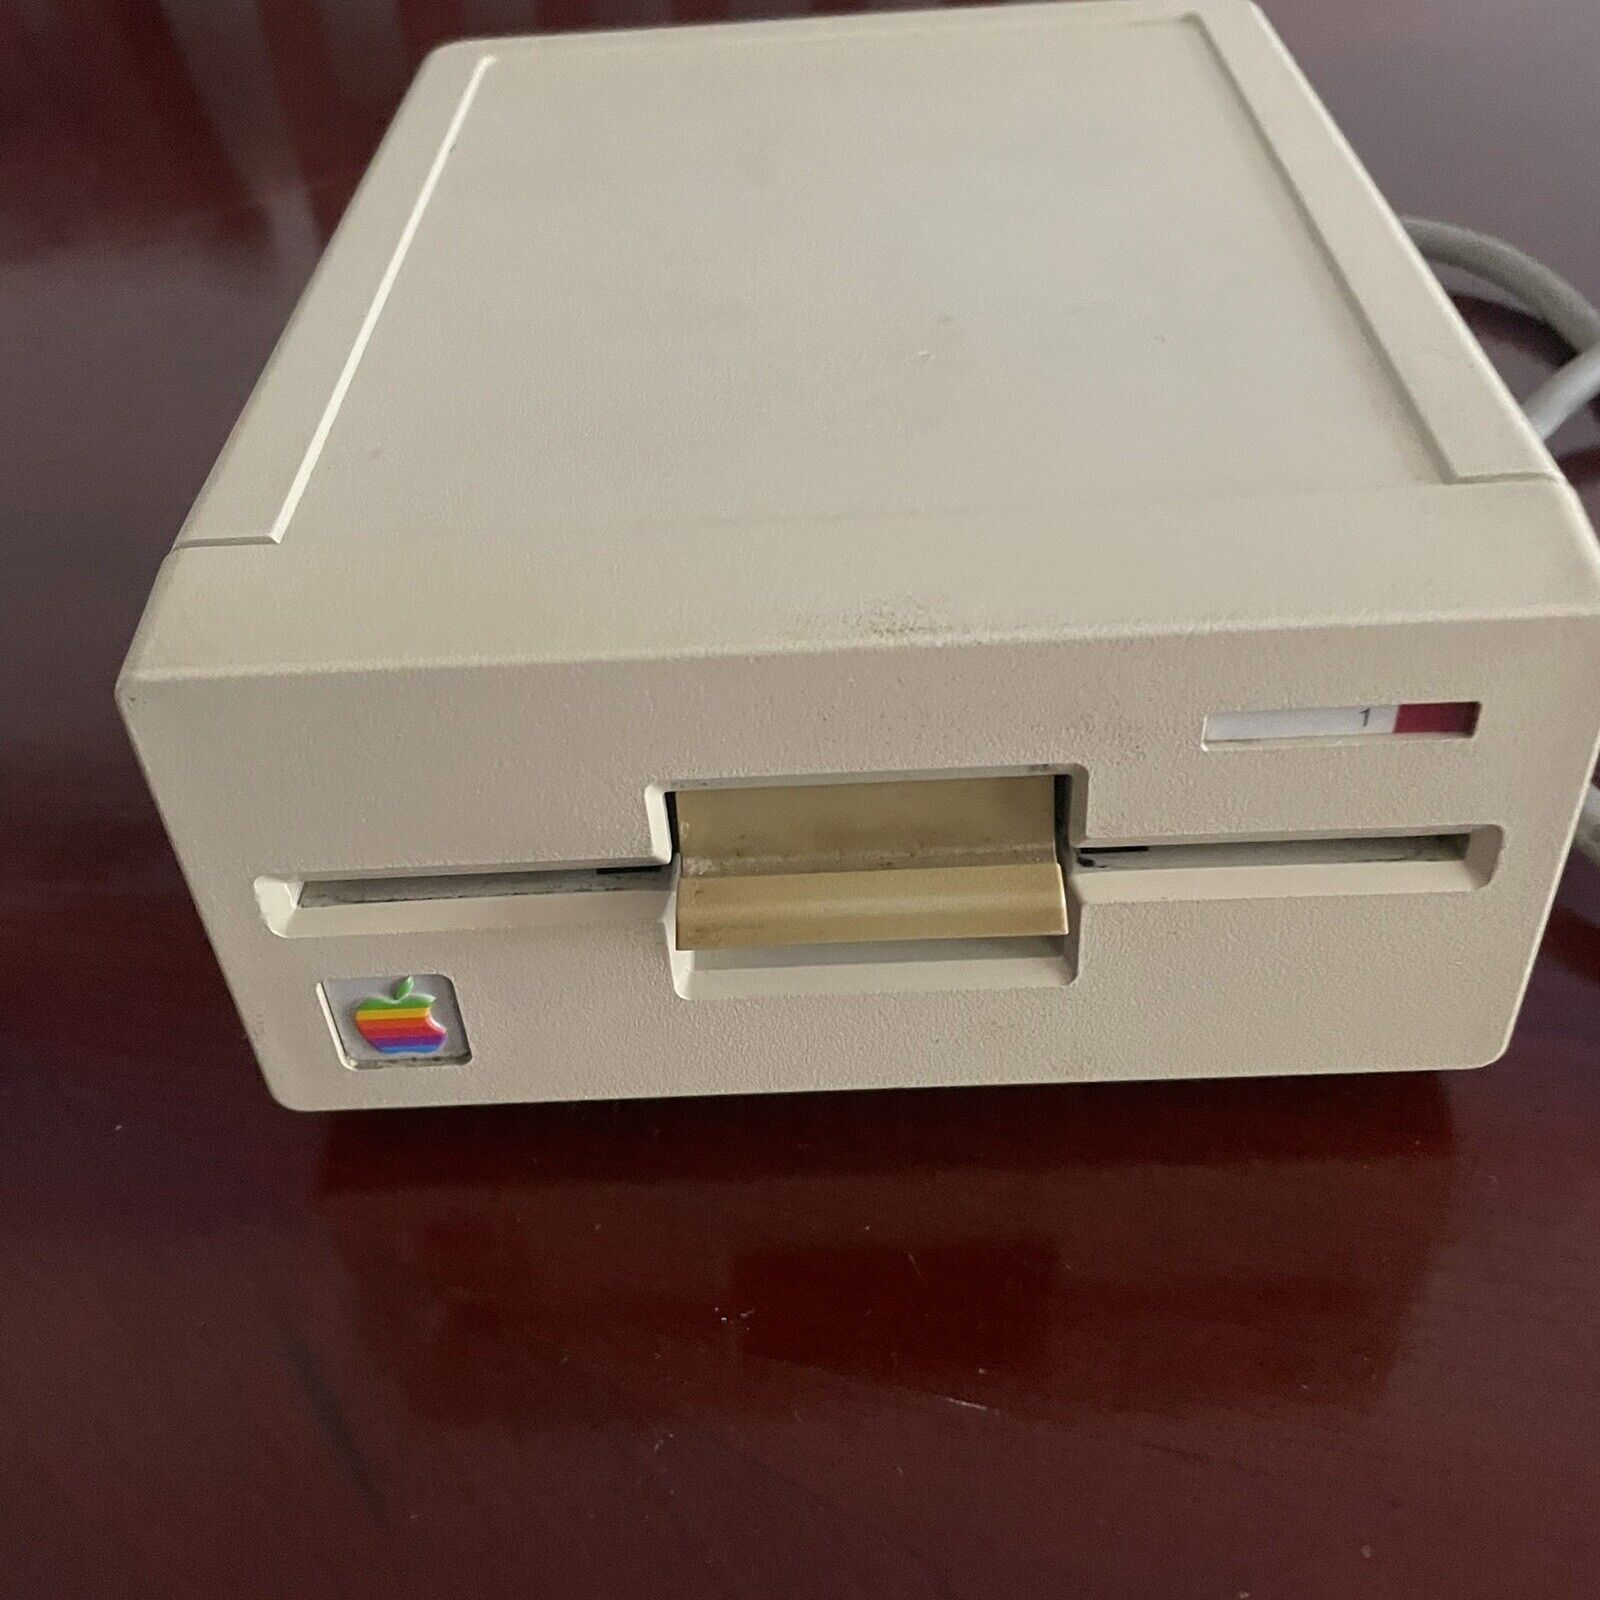 Vintage Apple A9M0107 5.25 Floppy Disk Drive External white for Macintosh AS IS